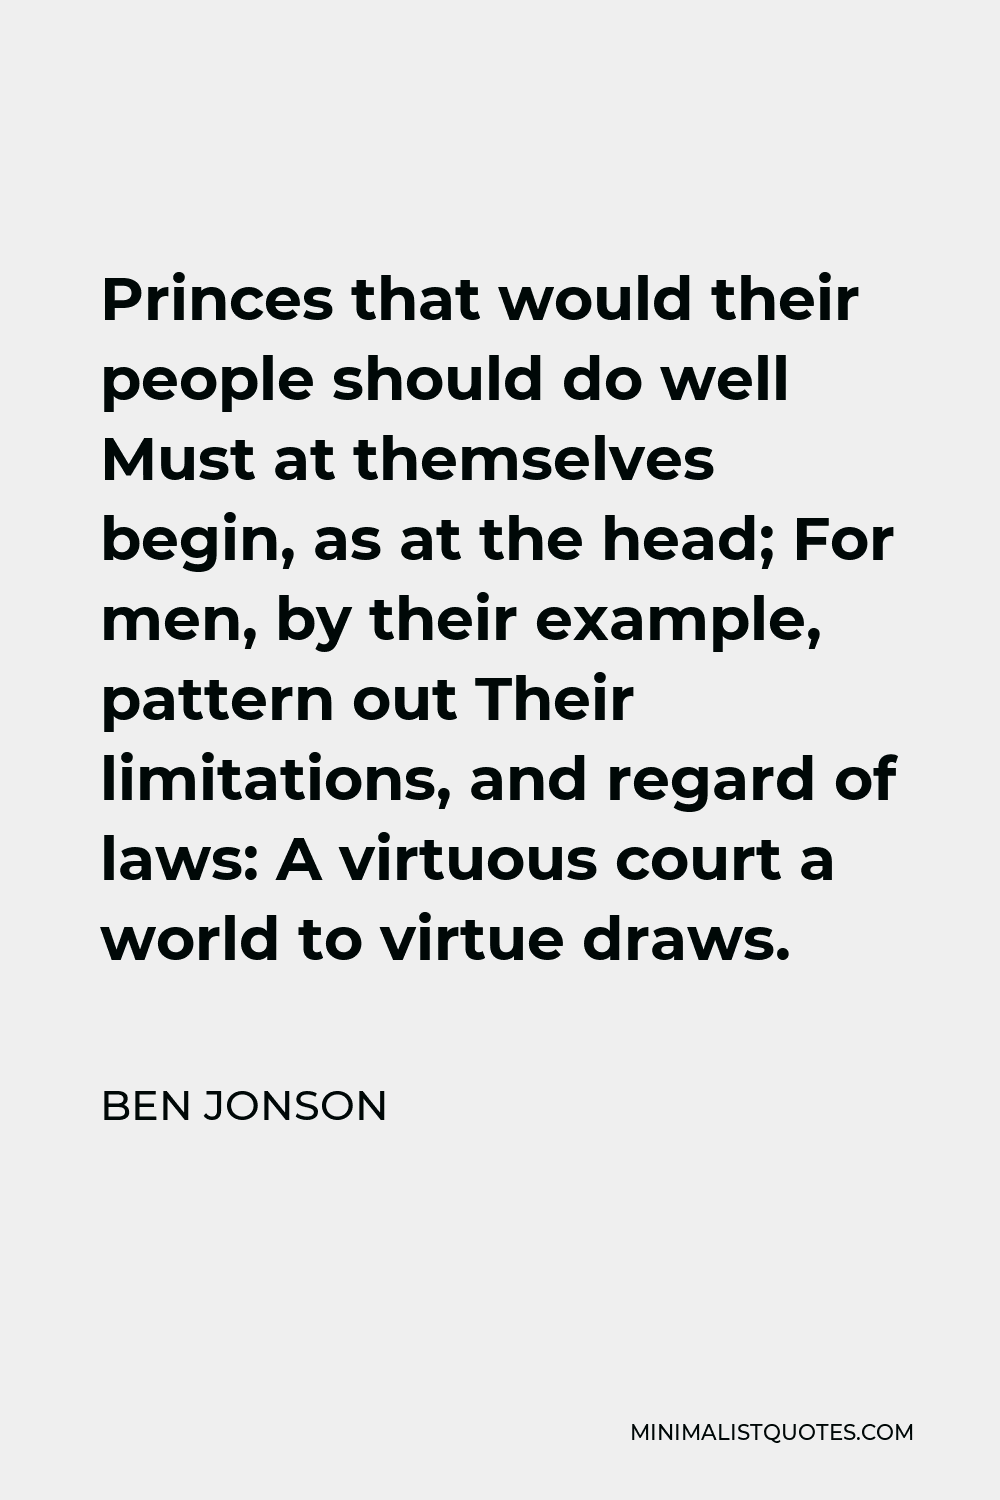 Ben Jonson Quote - Princes that would their people should do well Must at themselves begin, as at the head; For men, by their example, pattern out Their limitations, and regard of laws: A virtuous court a world to virtue draws.